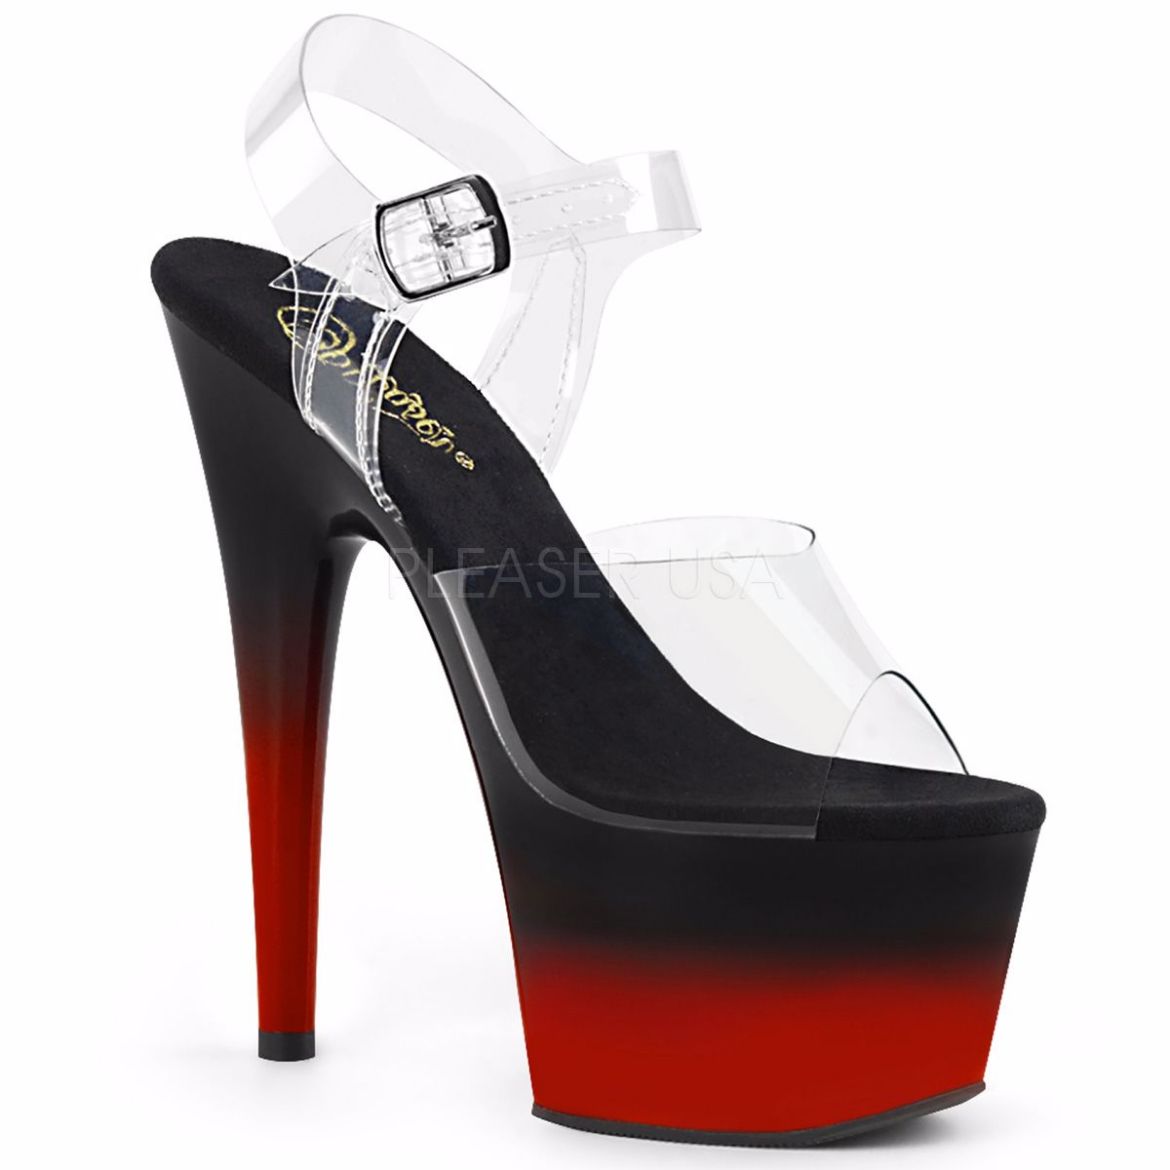 Product image of Pleaser ADORE-708BR-H Clear/Black-Red 7 inch (17.8 cm) Heel 2 3/4 inch (7 cm) Platform Two Tone Ankle Strap Sandal Shoes